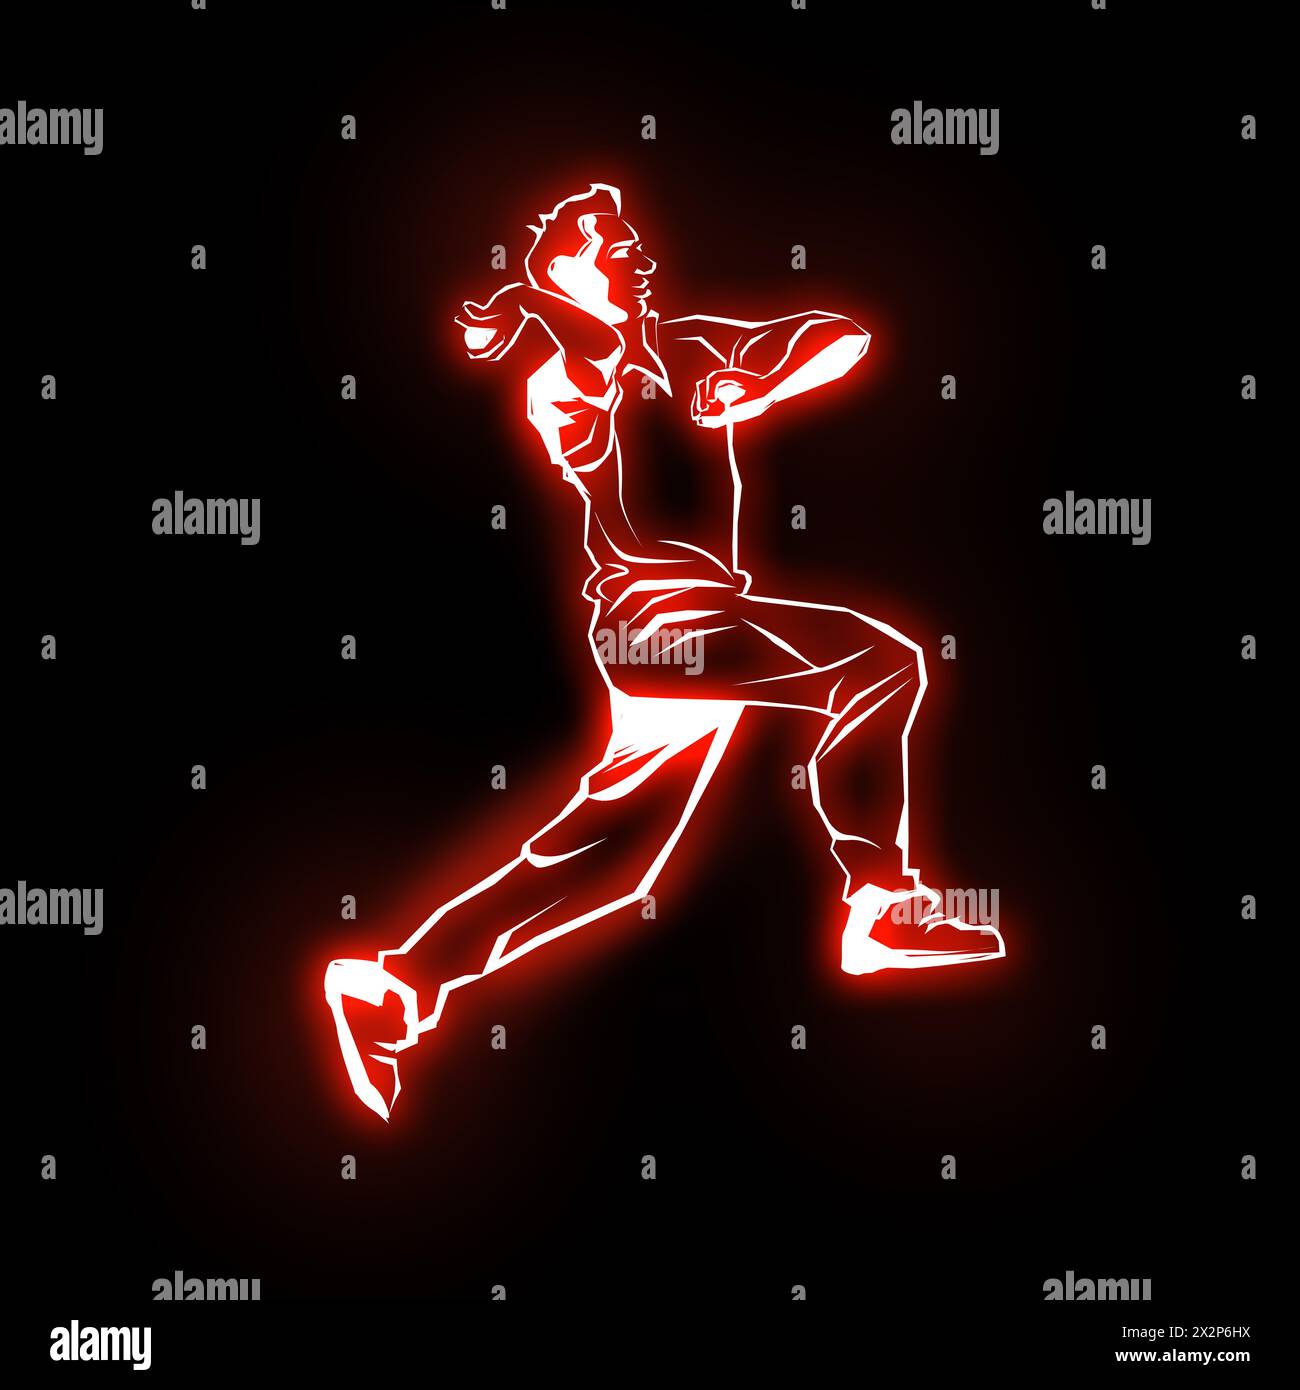 Bowler bowling in cricket championship sports. Cricket Fast Bowler, neon light effect, dark full dark background. cricket bowler in action. Neon glow Stock Photo